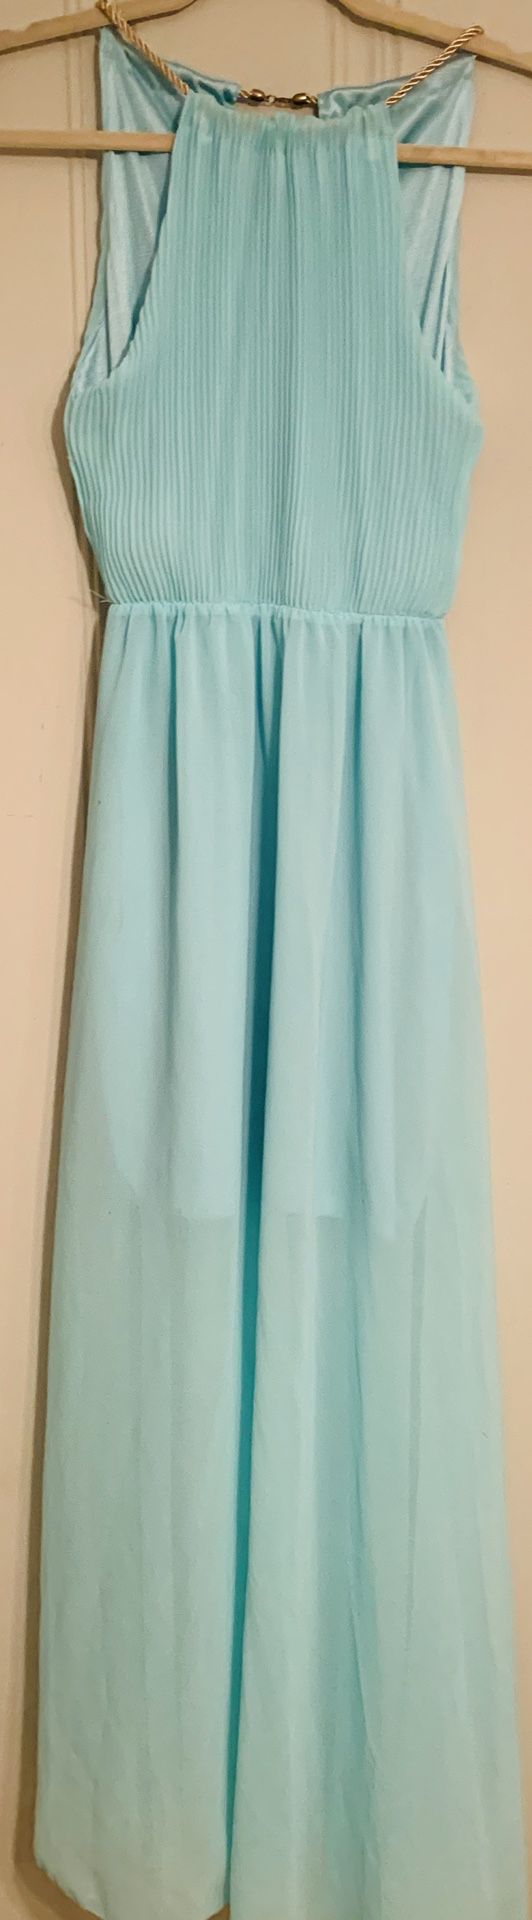 Junior's dress free I style light blue almost seafoam green with gold rope neck strap